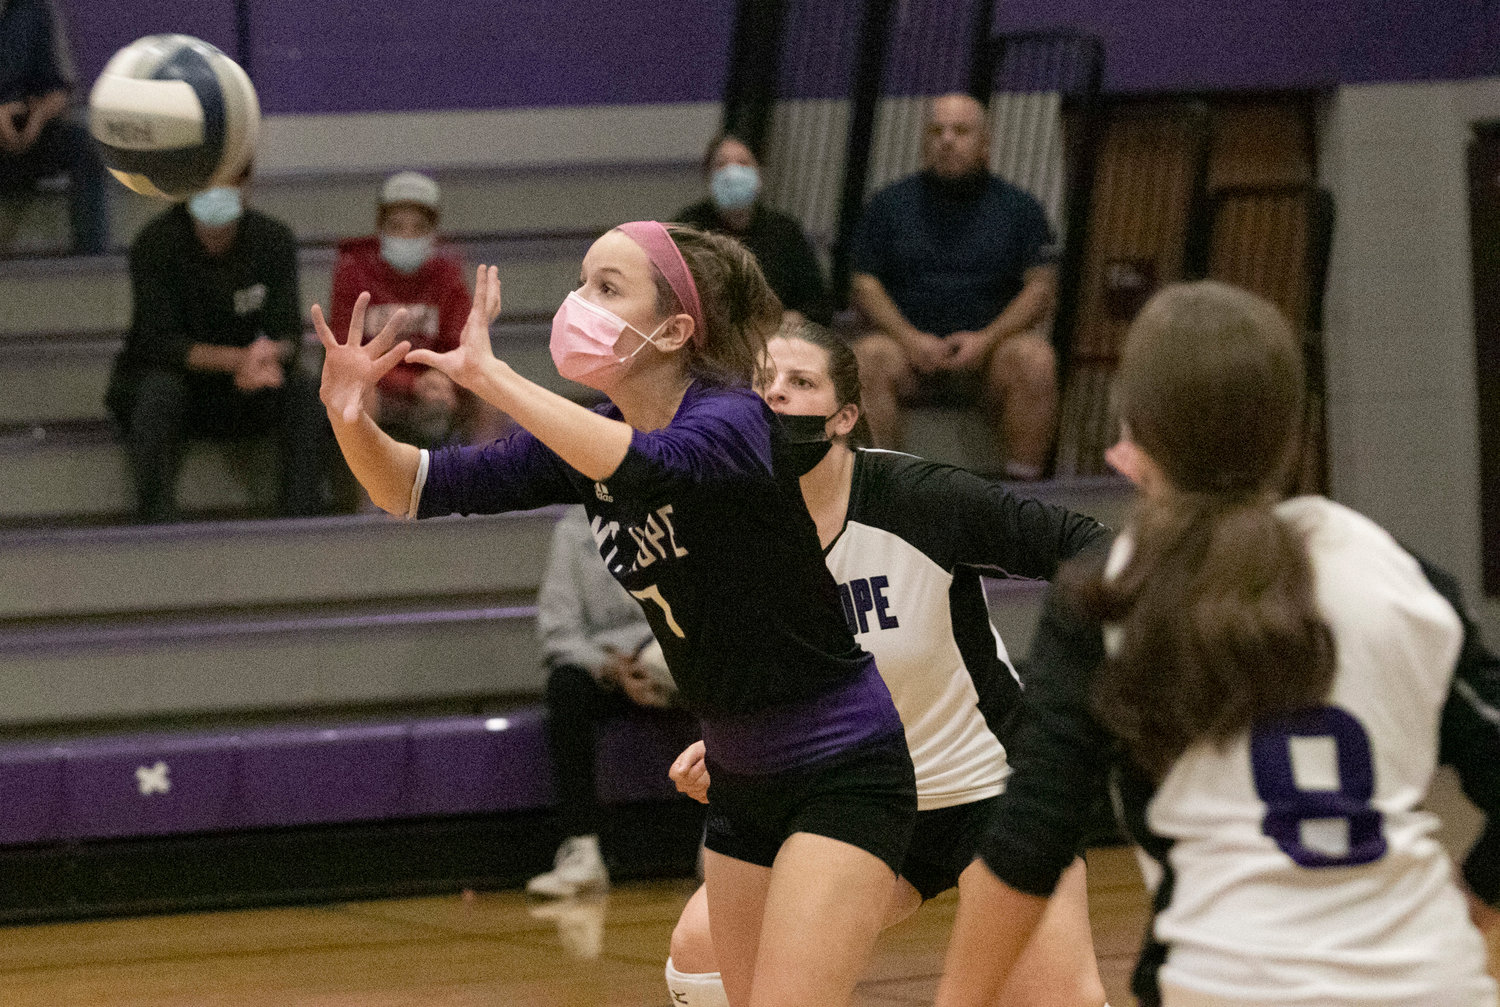 Grace Stephenson and Emma Torres look on as Erika Tally (middle) hits the ball over the net.